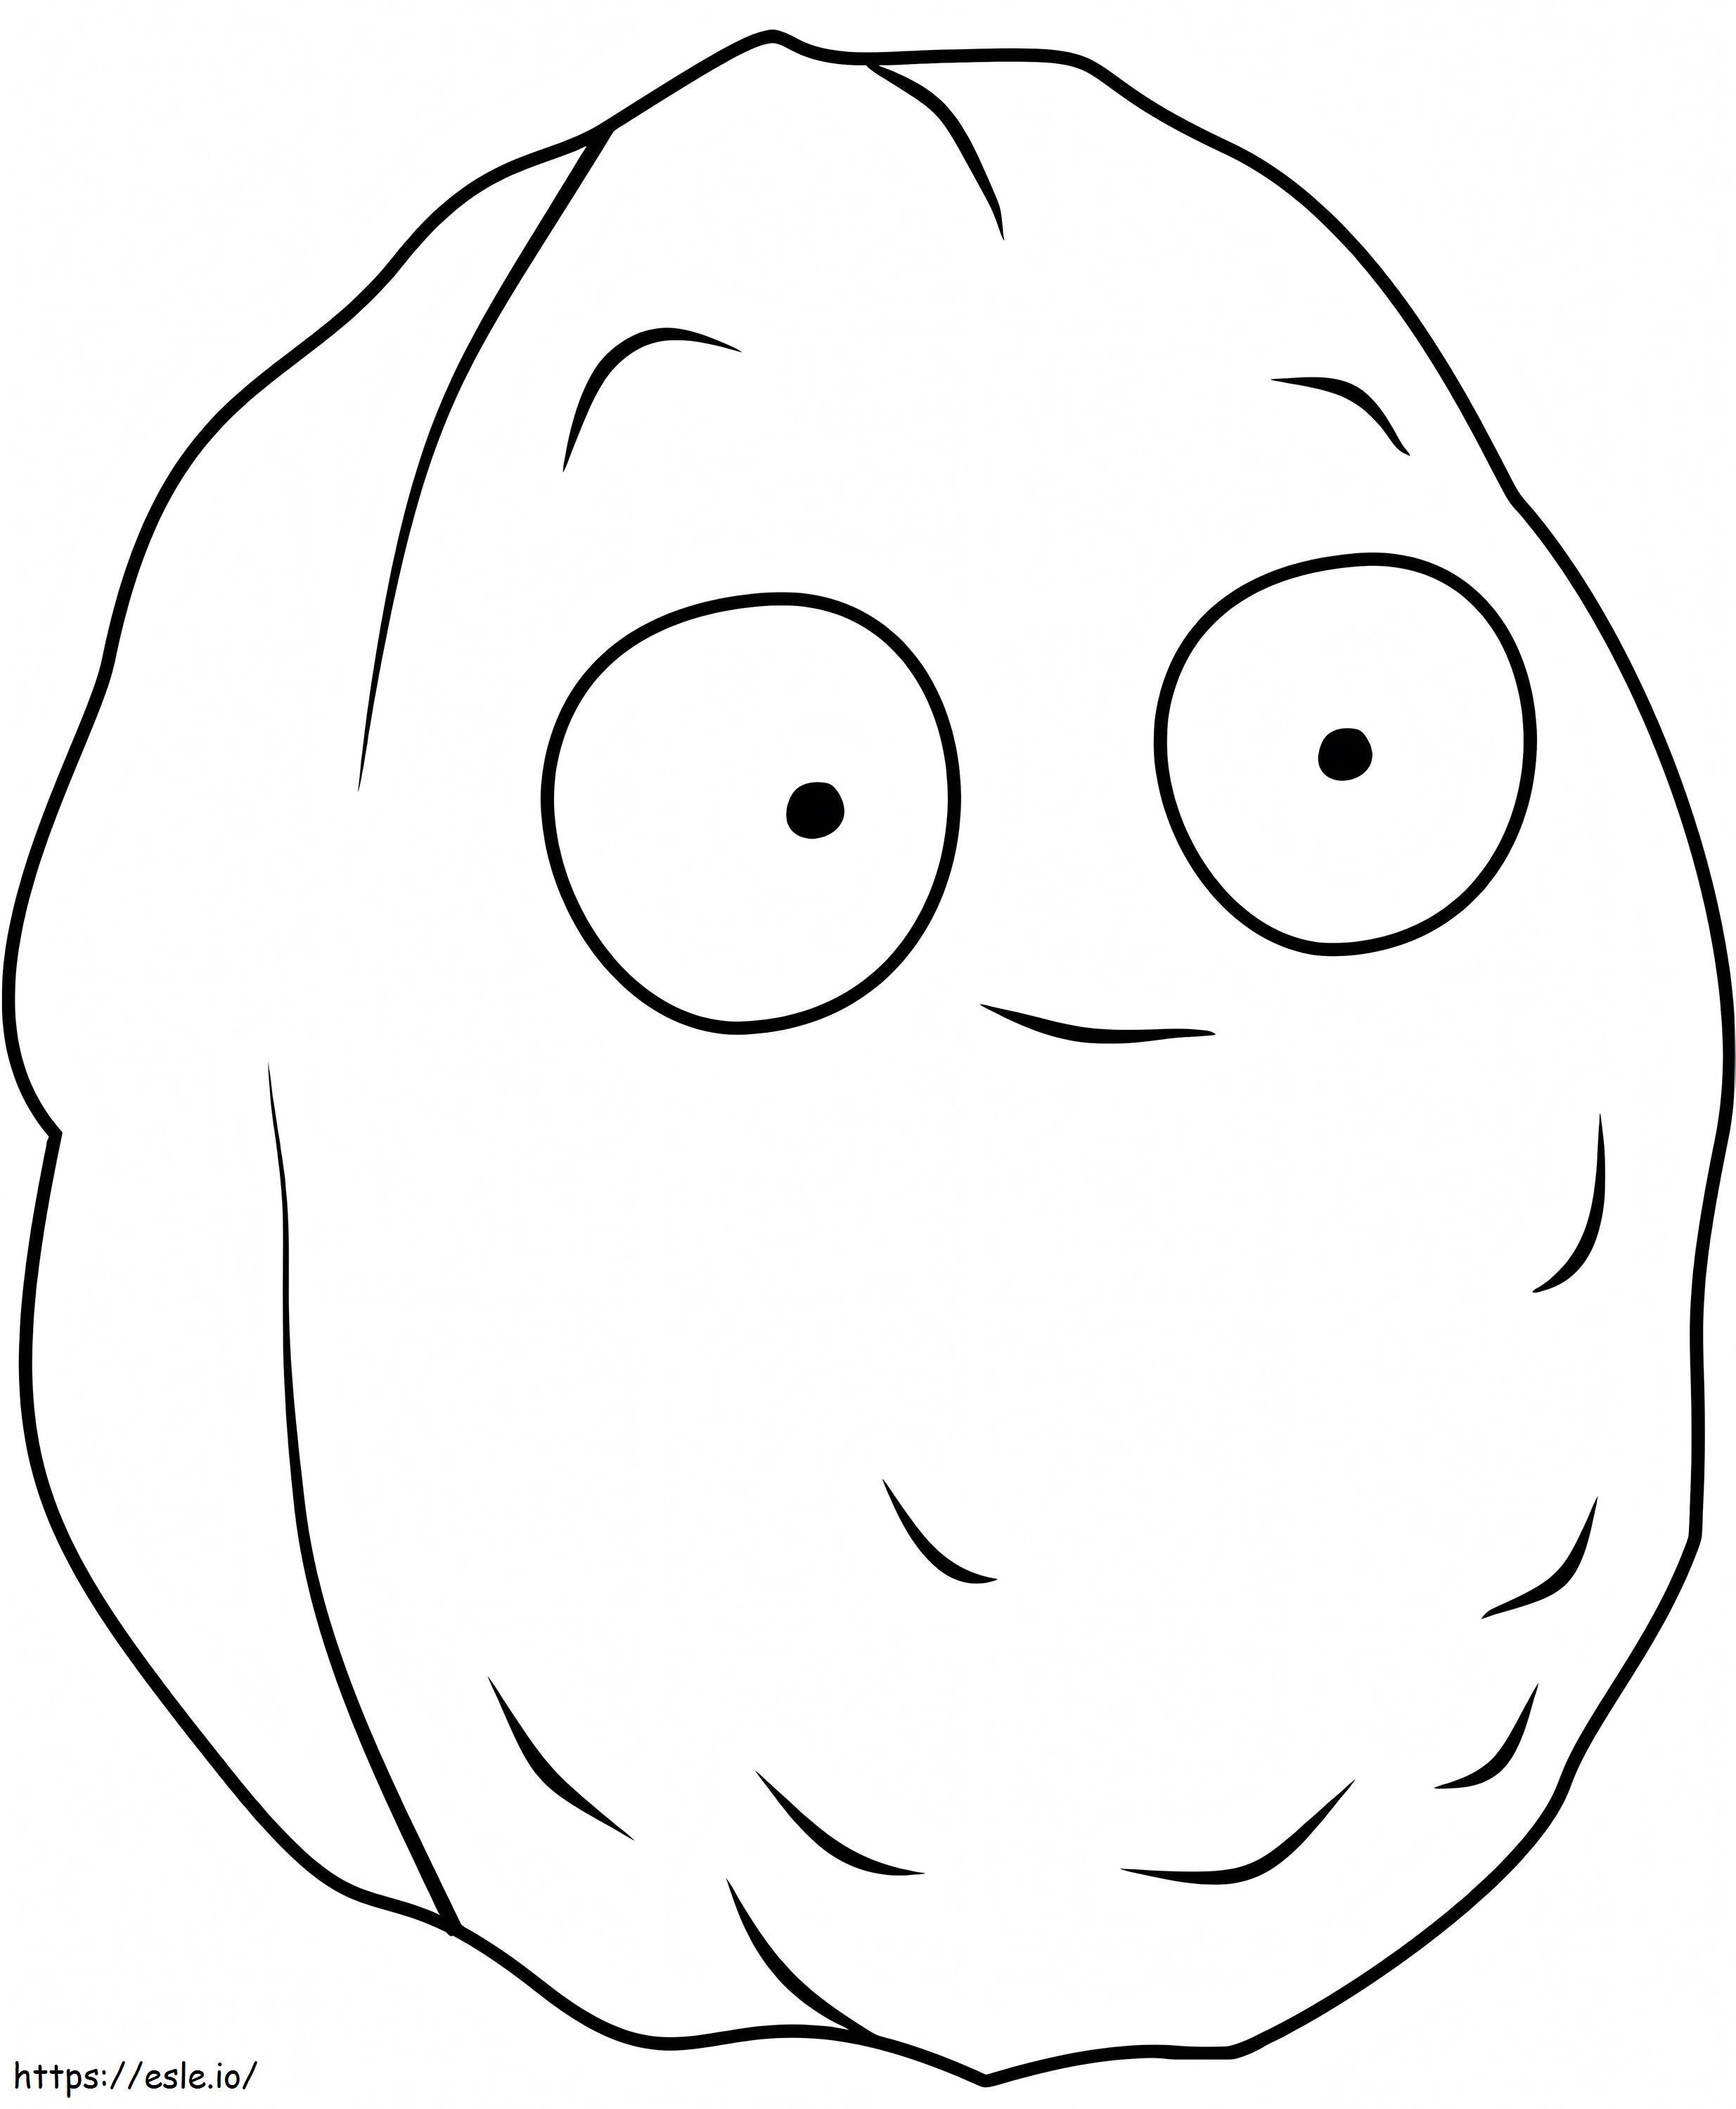 1565942590 Wall Nut A4 coloring page